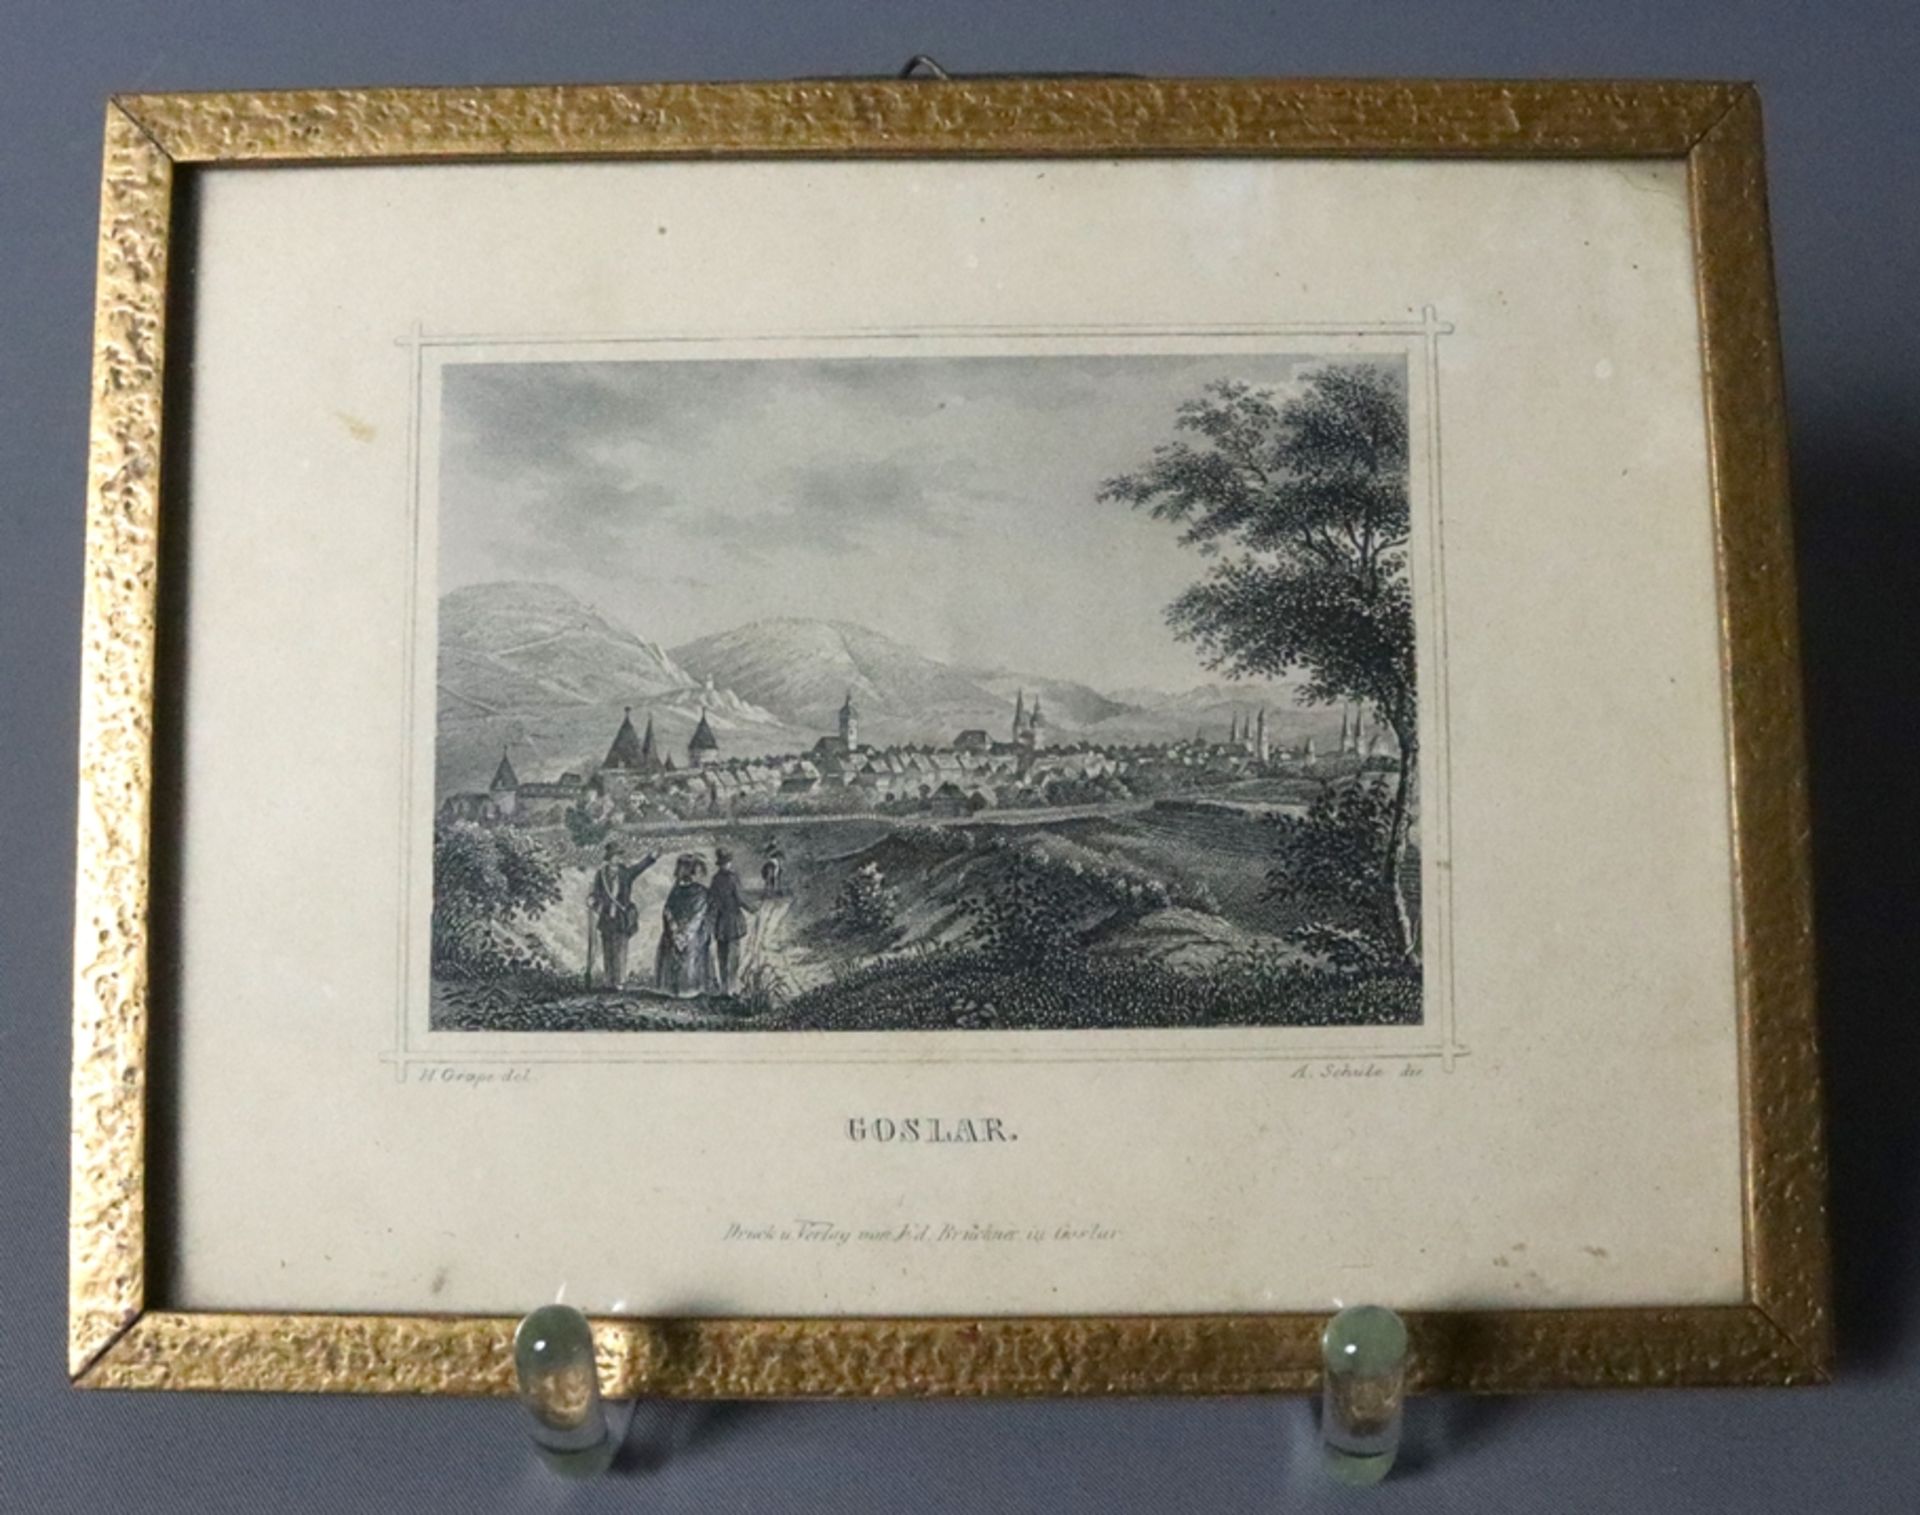 Coloured copper engraving and others with views of Goslar, 19th century, German - Image 4 of 4